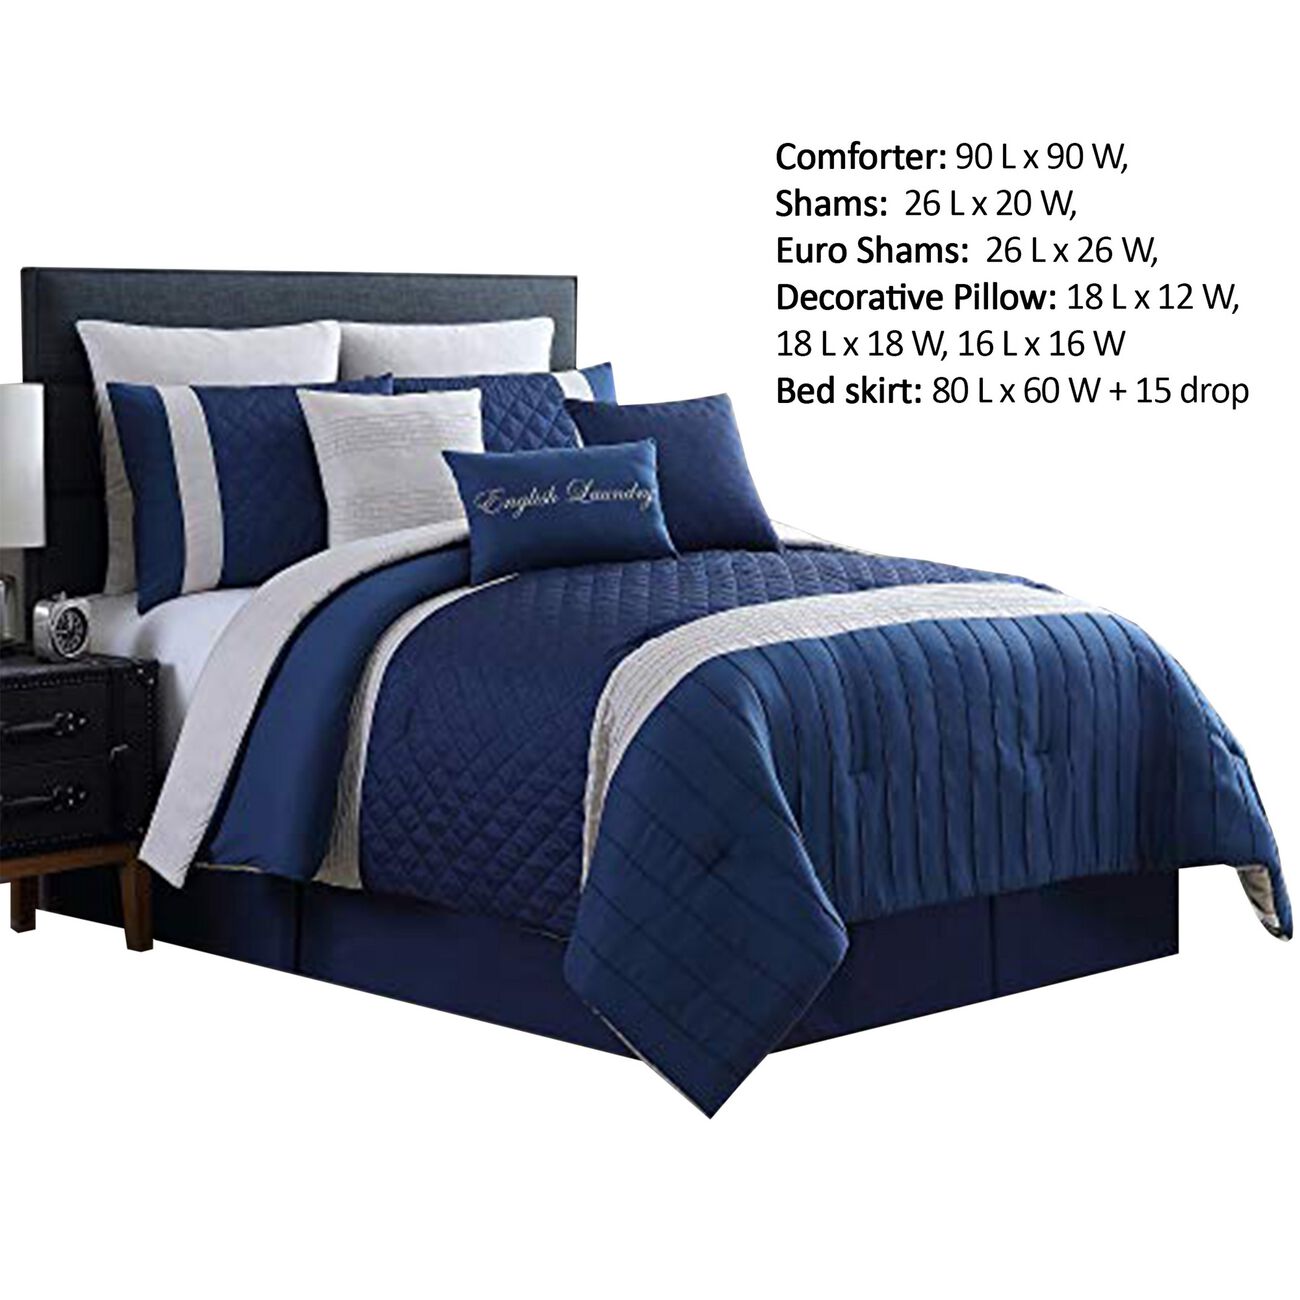 Basel Pleated Queen Comforter Set with Diamond Pattern The Urban Port, Blue and White